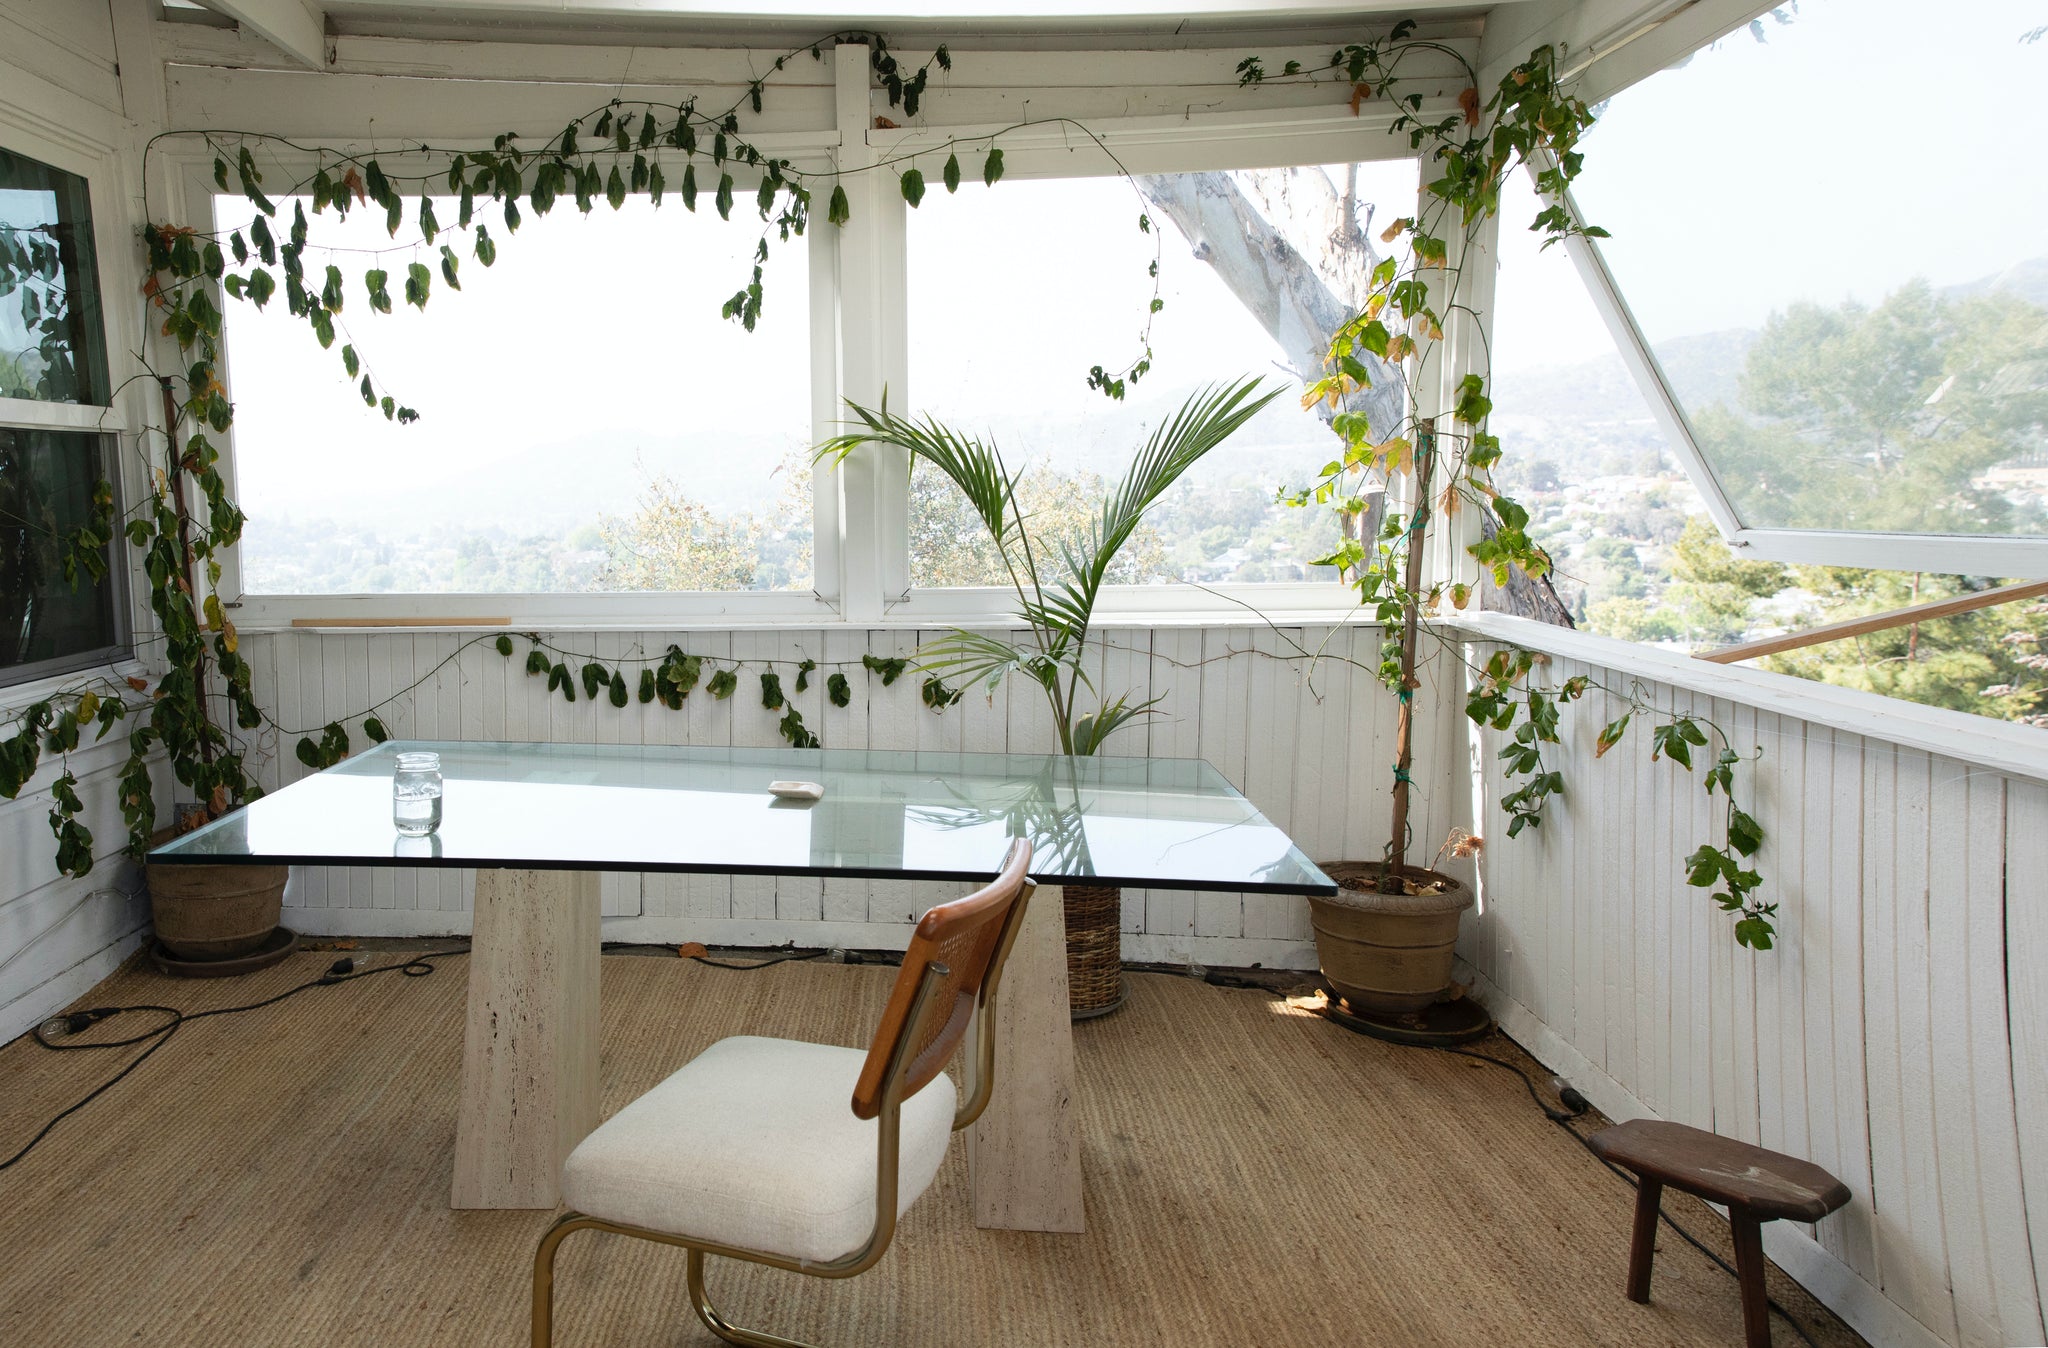 A photo of Maggi Simpkins scared summertime space: a porch that has been converted into a sunroom, filled with plants and a large glass desk.  